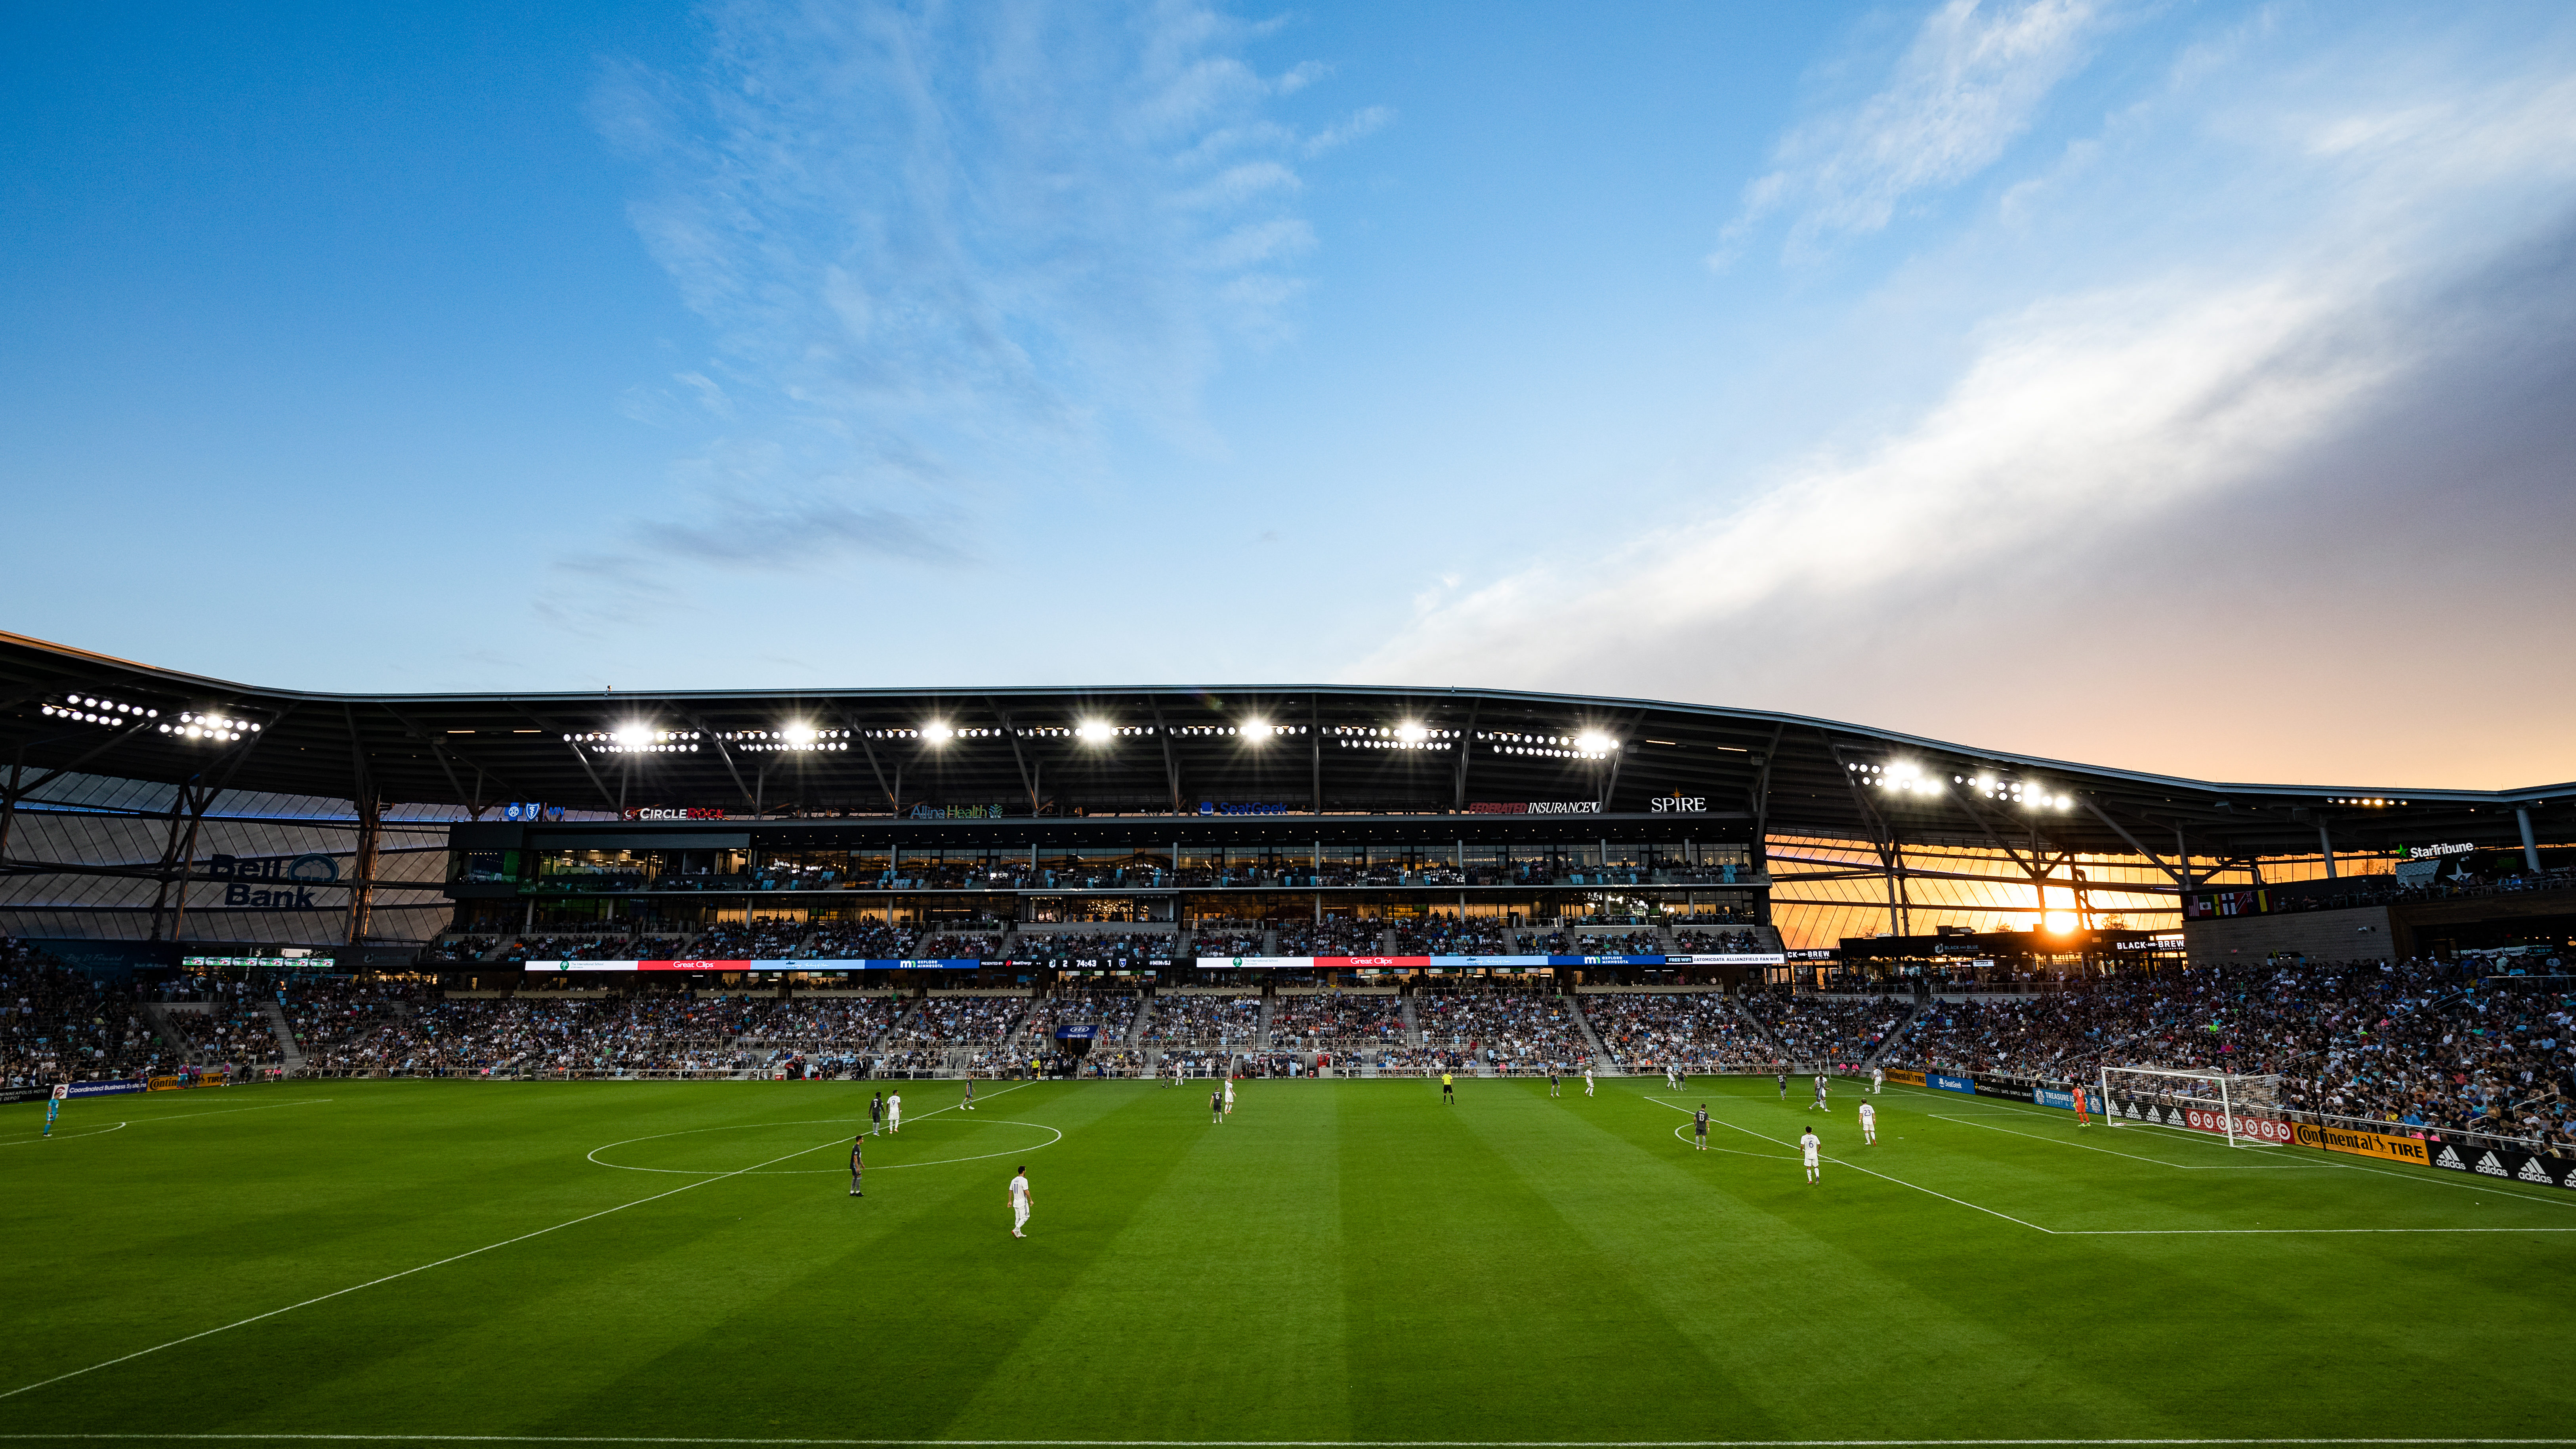 Major League Soccer (MLS) - Minnesota's got next. ⭐️ The 2022 MLS All Star  Game pres. by Target is headed to the Twin Cities.